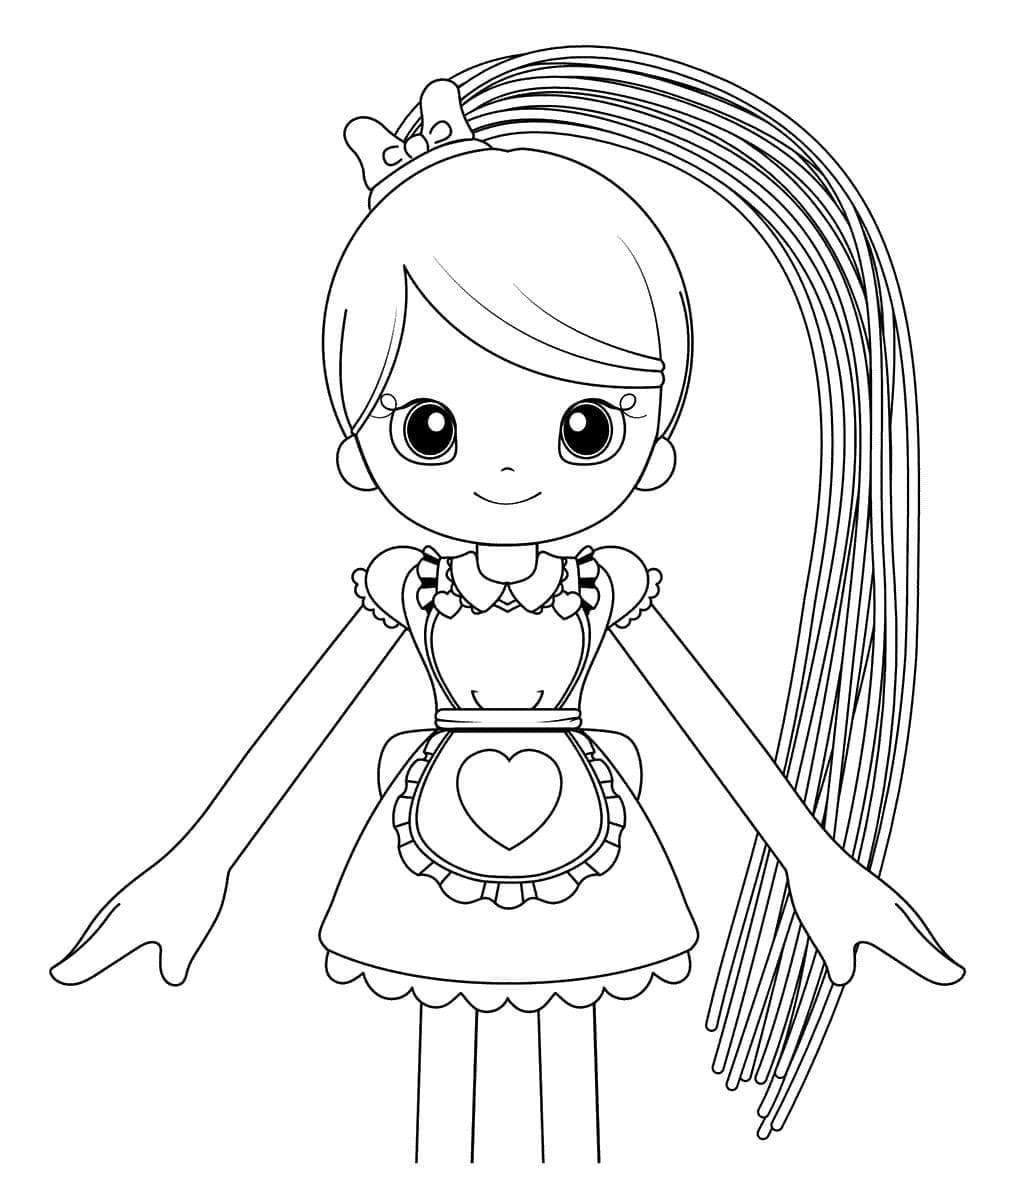 Top 25 Prinatble Betty Spaghetty Coloring Pages - Online Coloring Pages